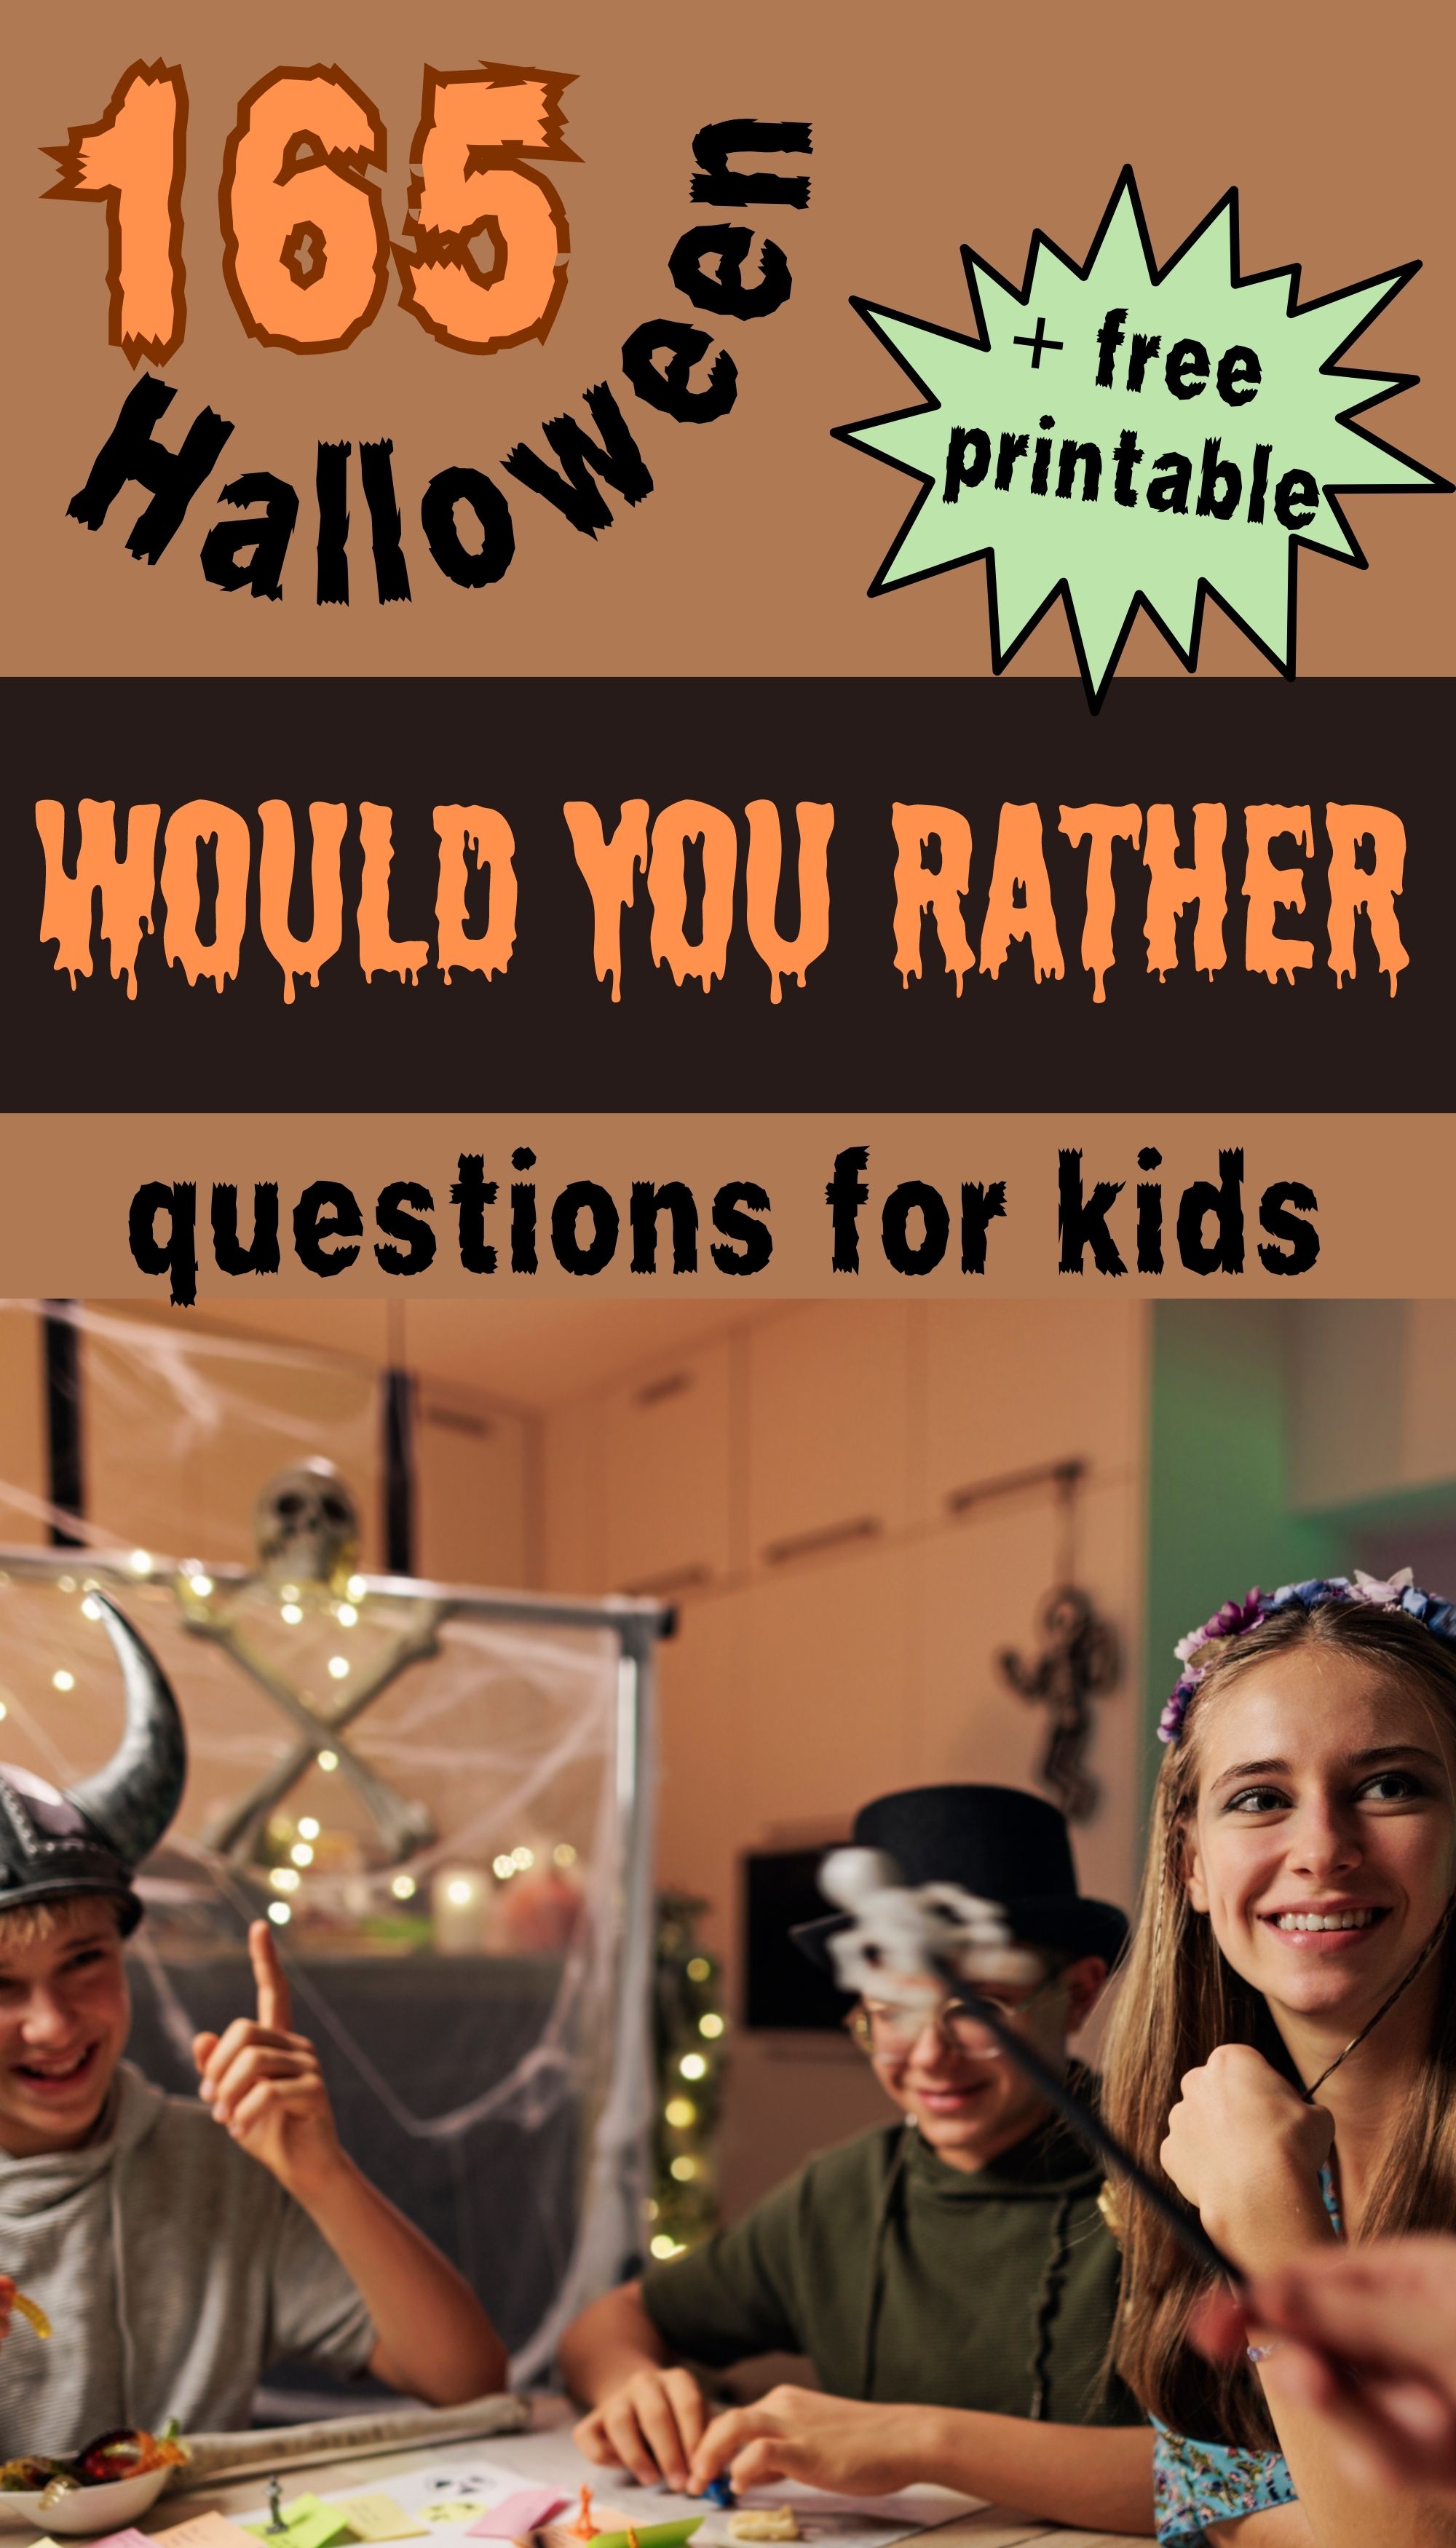 brown background with orange text overlay that says 165 halloween would you rather questions for kids with a green burst that says + free printable and an image of a family dressed in halloween costumes sitting around a table smiling